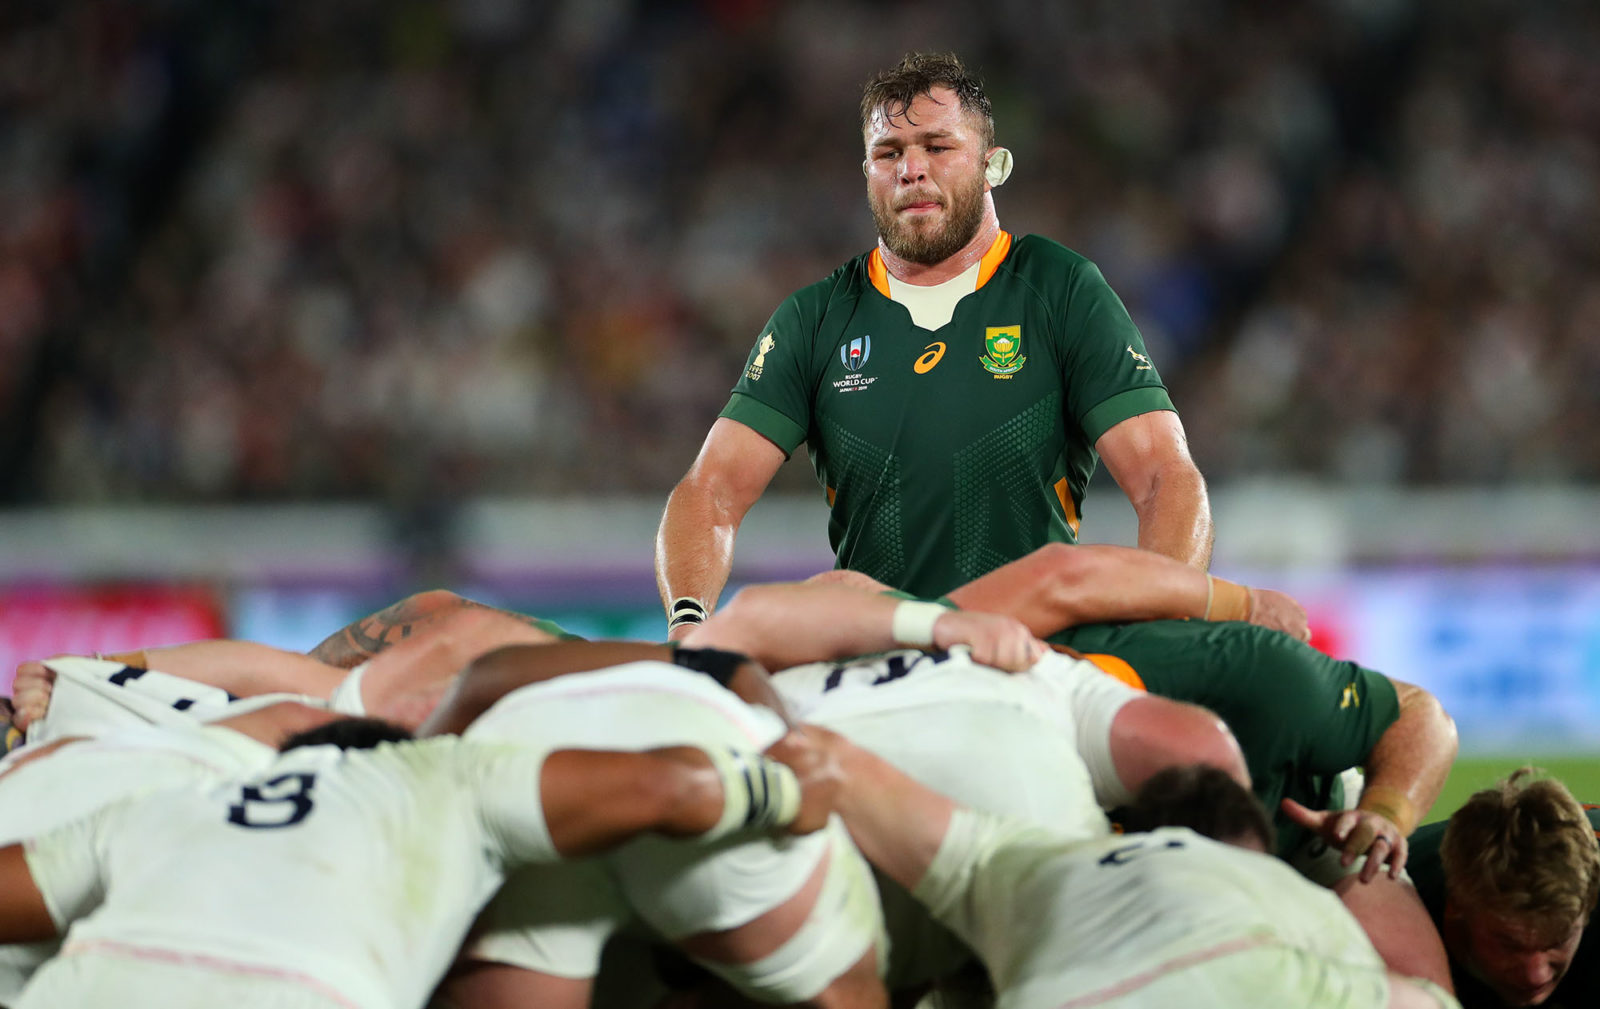 Duane Vermeulen to undergo surgery, while &#39;fire pit&#39; Boks enter hall of shame